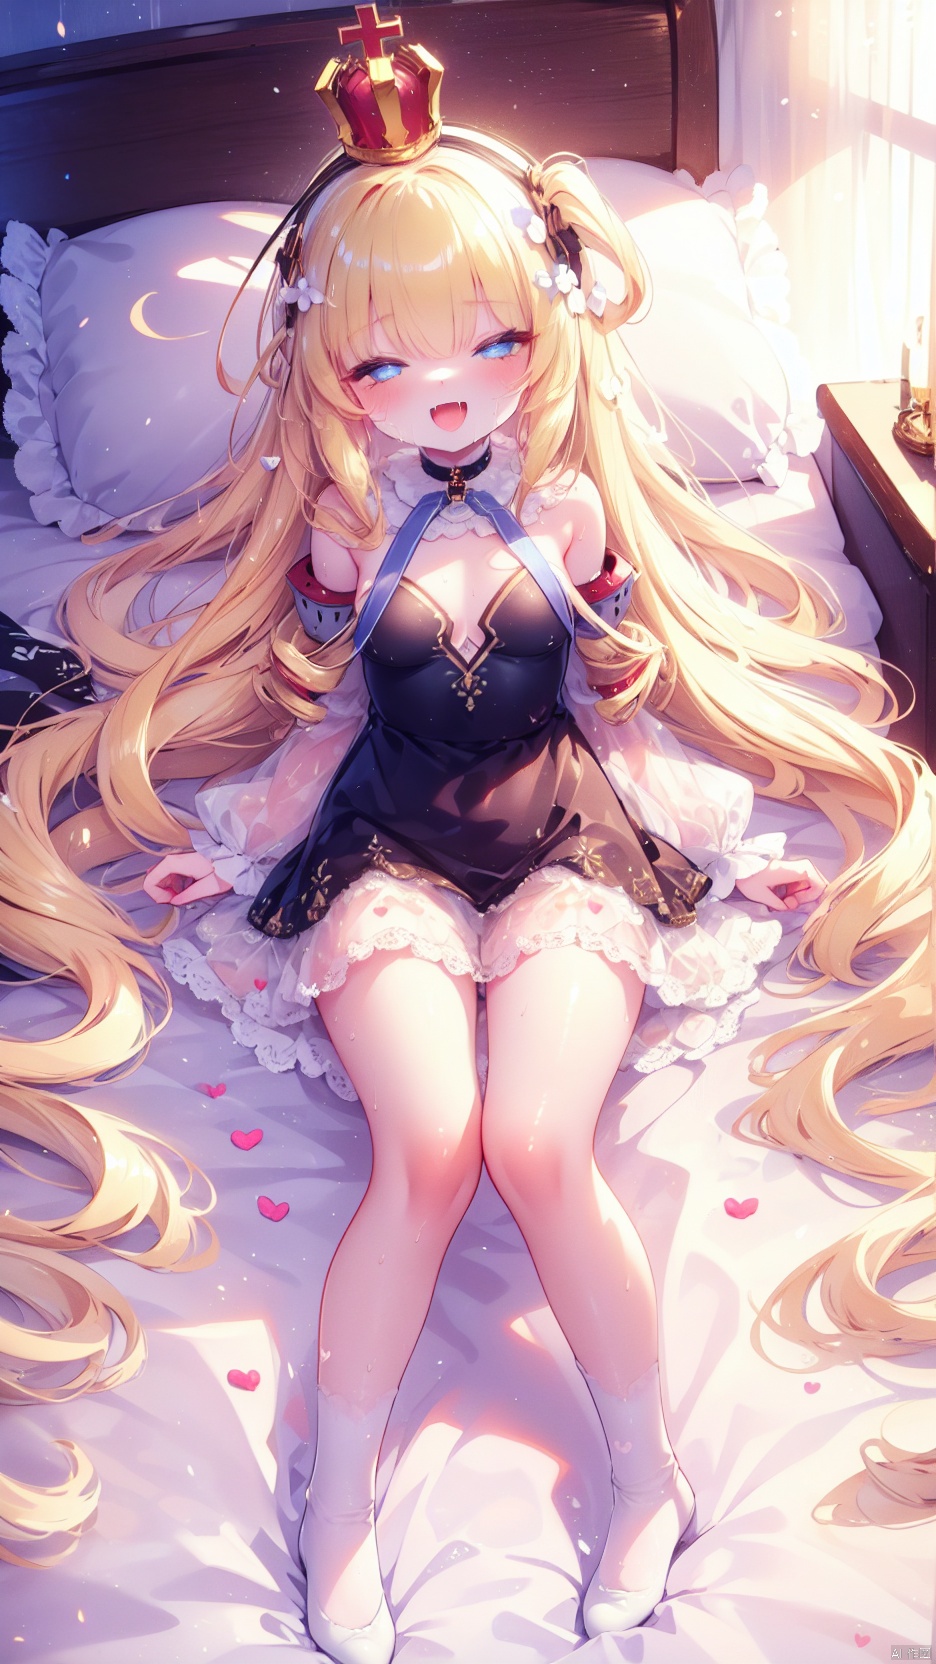  queen elizabeth (azur lane),Little girl(1.5),aged down,beautiful detailed girl,narrow waist,(very small breasts),Delicate cute face,choker,(nude),blue eyes,beautiful detailed eyes,Glowing eyes,((half-closed eyes,heart-shaped pupils)),((blonde hair)),((hair spread out)),very long shoulder,glowing hair,Extremely delicate hair,Thin leg,white legwear garter,black footwear,Slender fingers,steepled fingers,shiny nails,((lying on bed,separated legs,art shift,v arms)),ahegao(expression),smile,open mouth,tongue out,licking lips,drooling,fangs out,big fangs,puffy cheeks,beautiful detailed mouth,looking at viewer,semen in the mouth,semen on the hair,semen on the face,too many semen on the breasts,too many semen dripping from the body,blood on between legs,wet and messy,sweat,semen(ornament),bedroom,ornate bed,hyper realistic,magic,4k,incredible quality,best quality,masterpiece,highly detailed,extremely detailed CG,cinematic lighting,light particle,backlighting,full body,high definition,detail enhancement,(perfect hands, perfect anatomy),8k_wallpaper,extreme details,colorful, mirrornun, shuiwa, (\shen ming shao nv\)